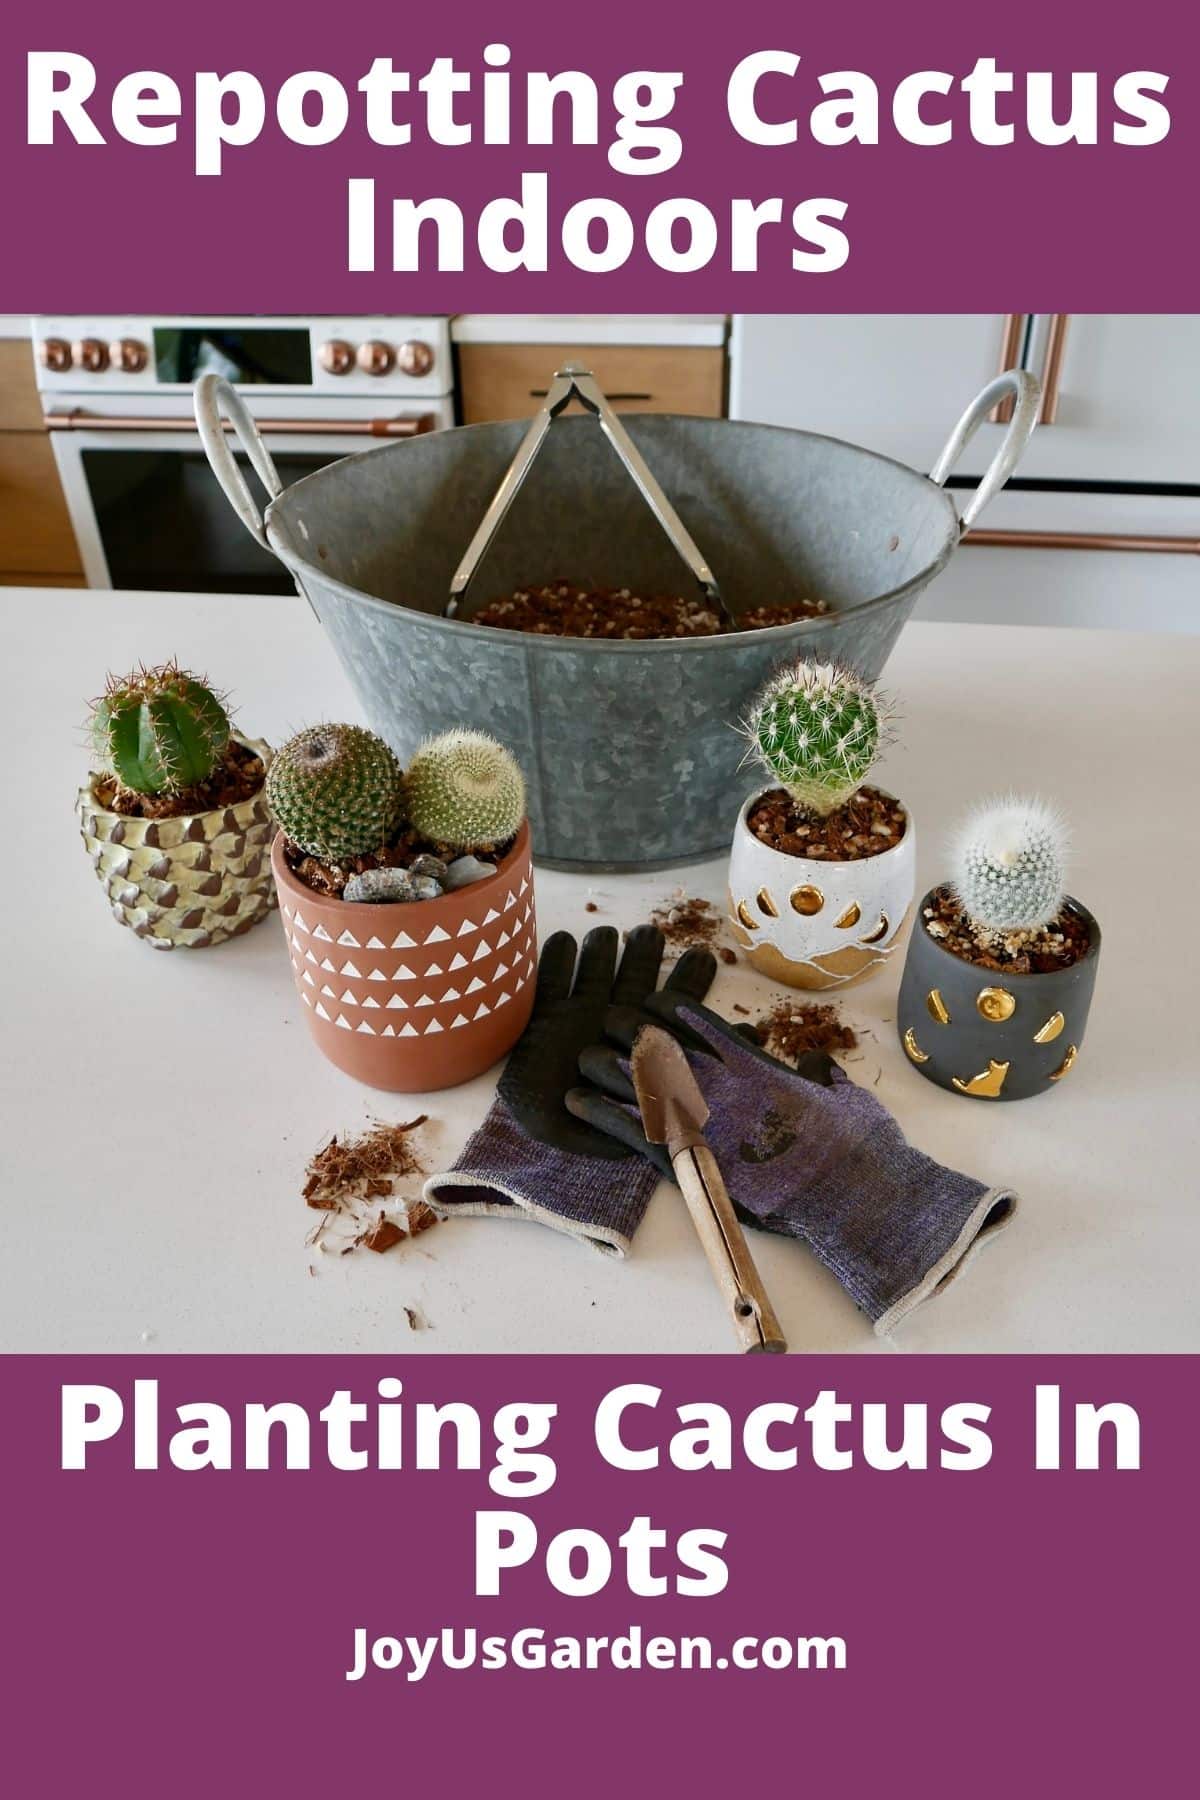 small cacti in small pots sit in front of a bin of cactus soil mix with tongs, a small trowel & gardening gloves next to them the text reads repotting cacti planting cactus in pots joyusgarden.com